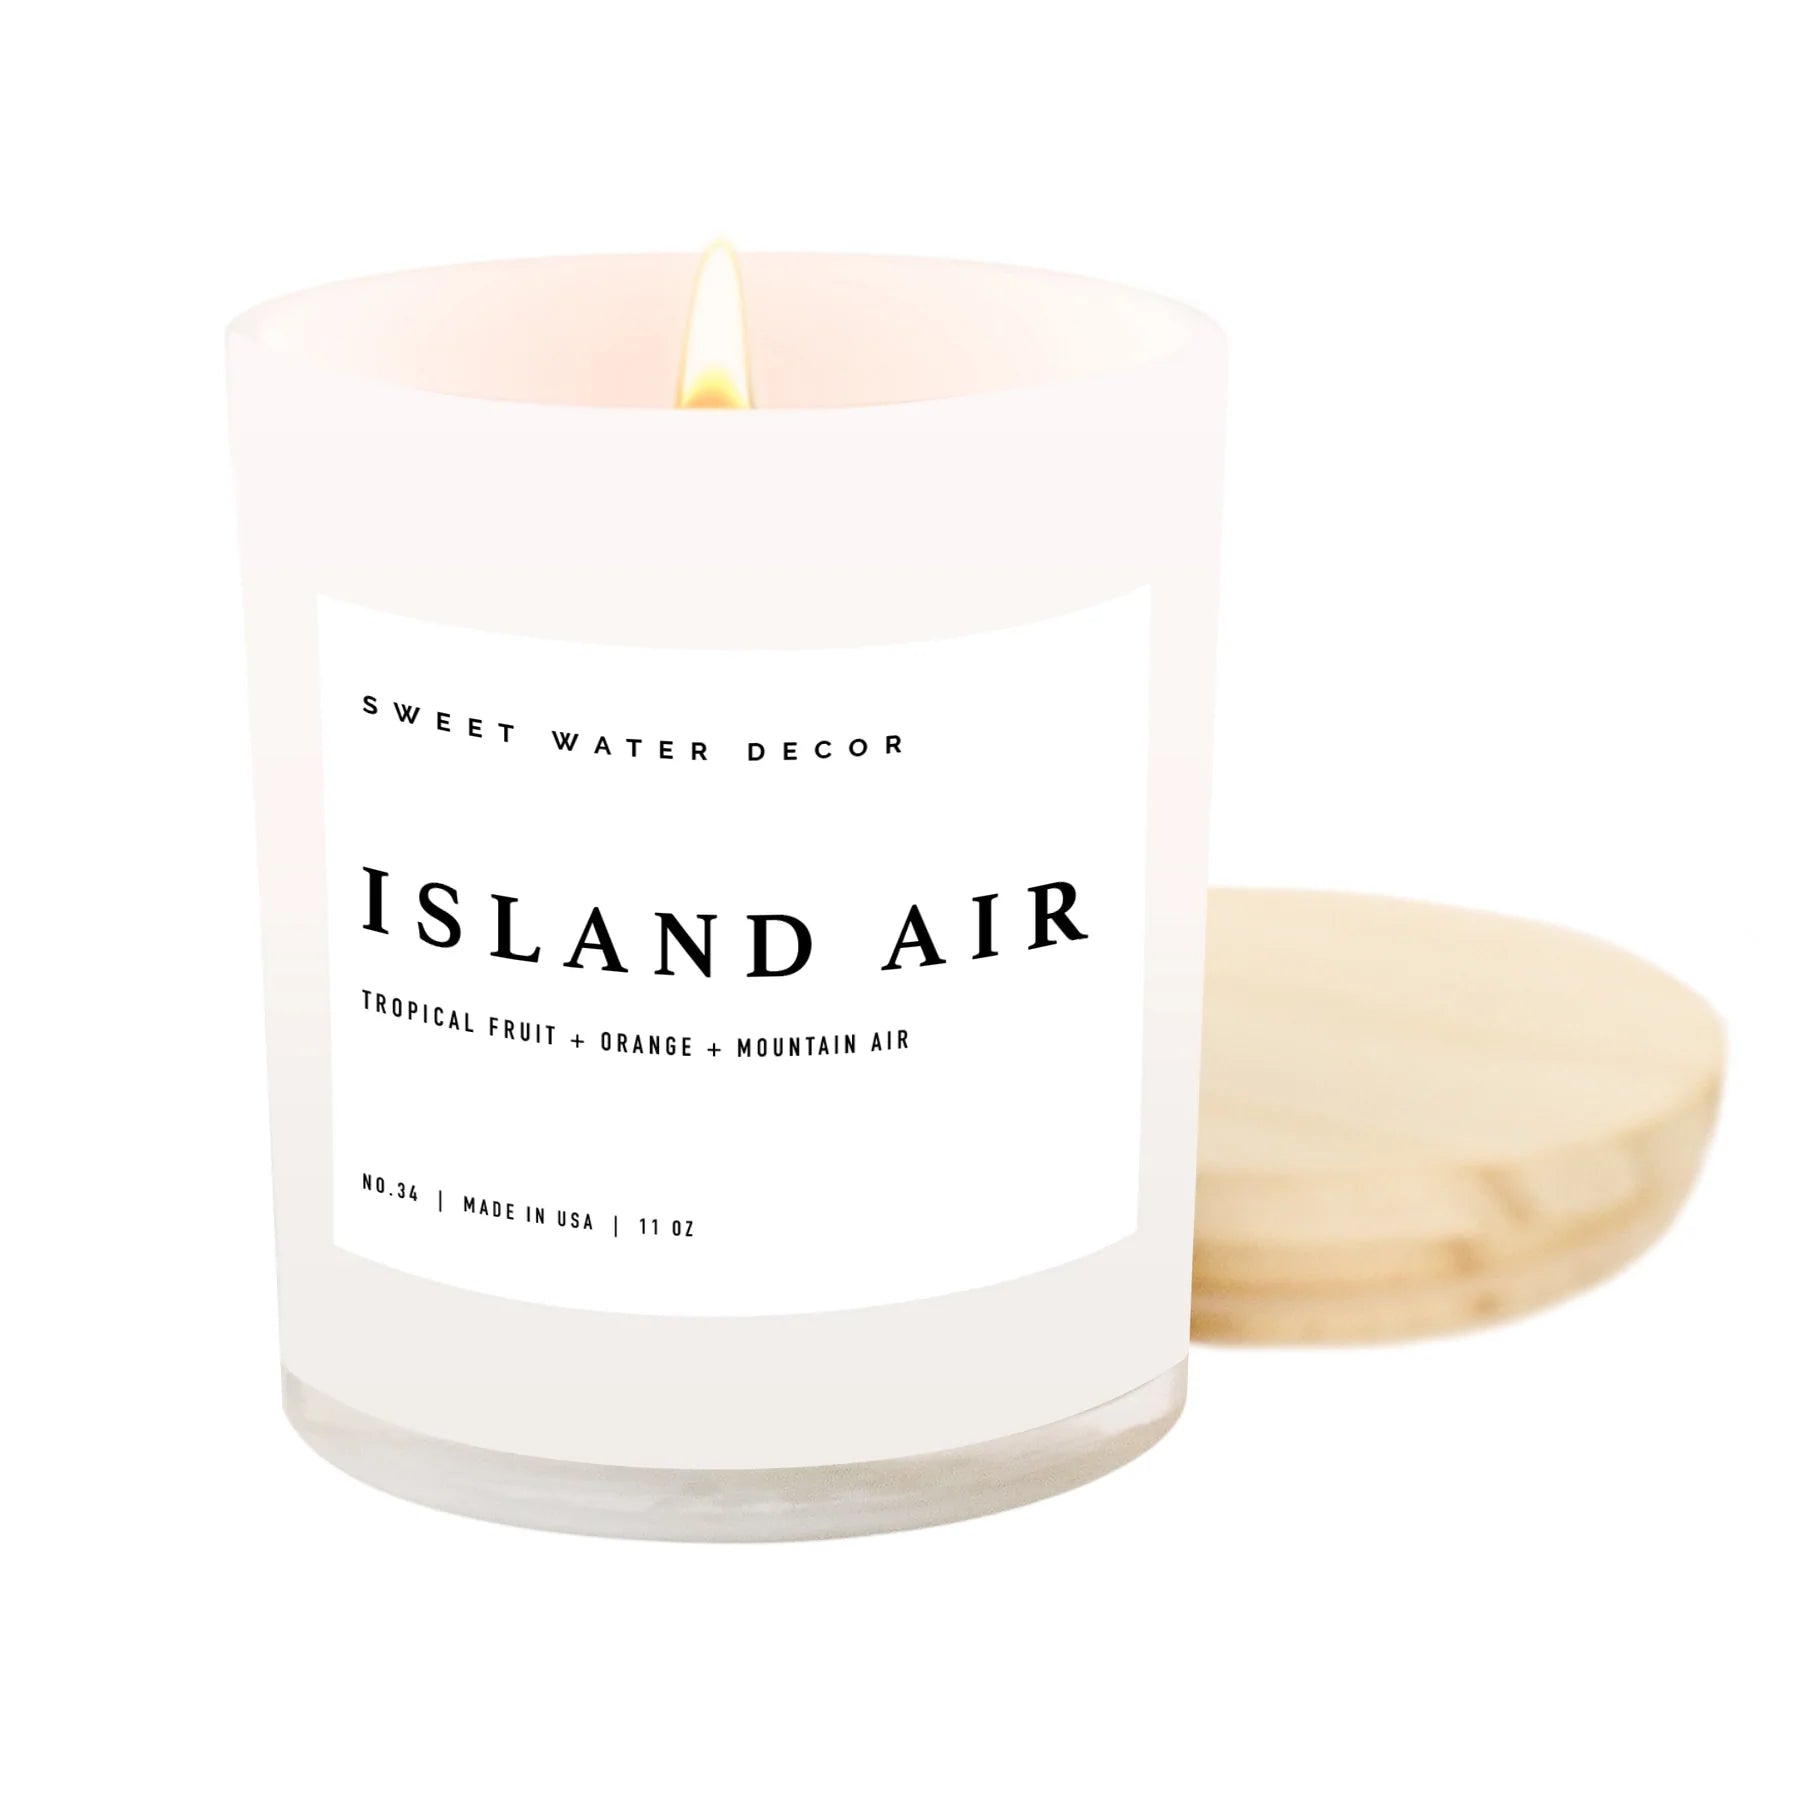 Sweet Water Decor Island Air Soy Candle - 11 oz. White Jar